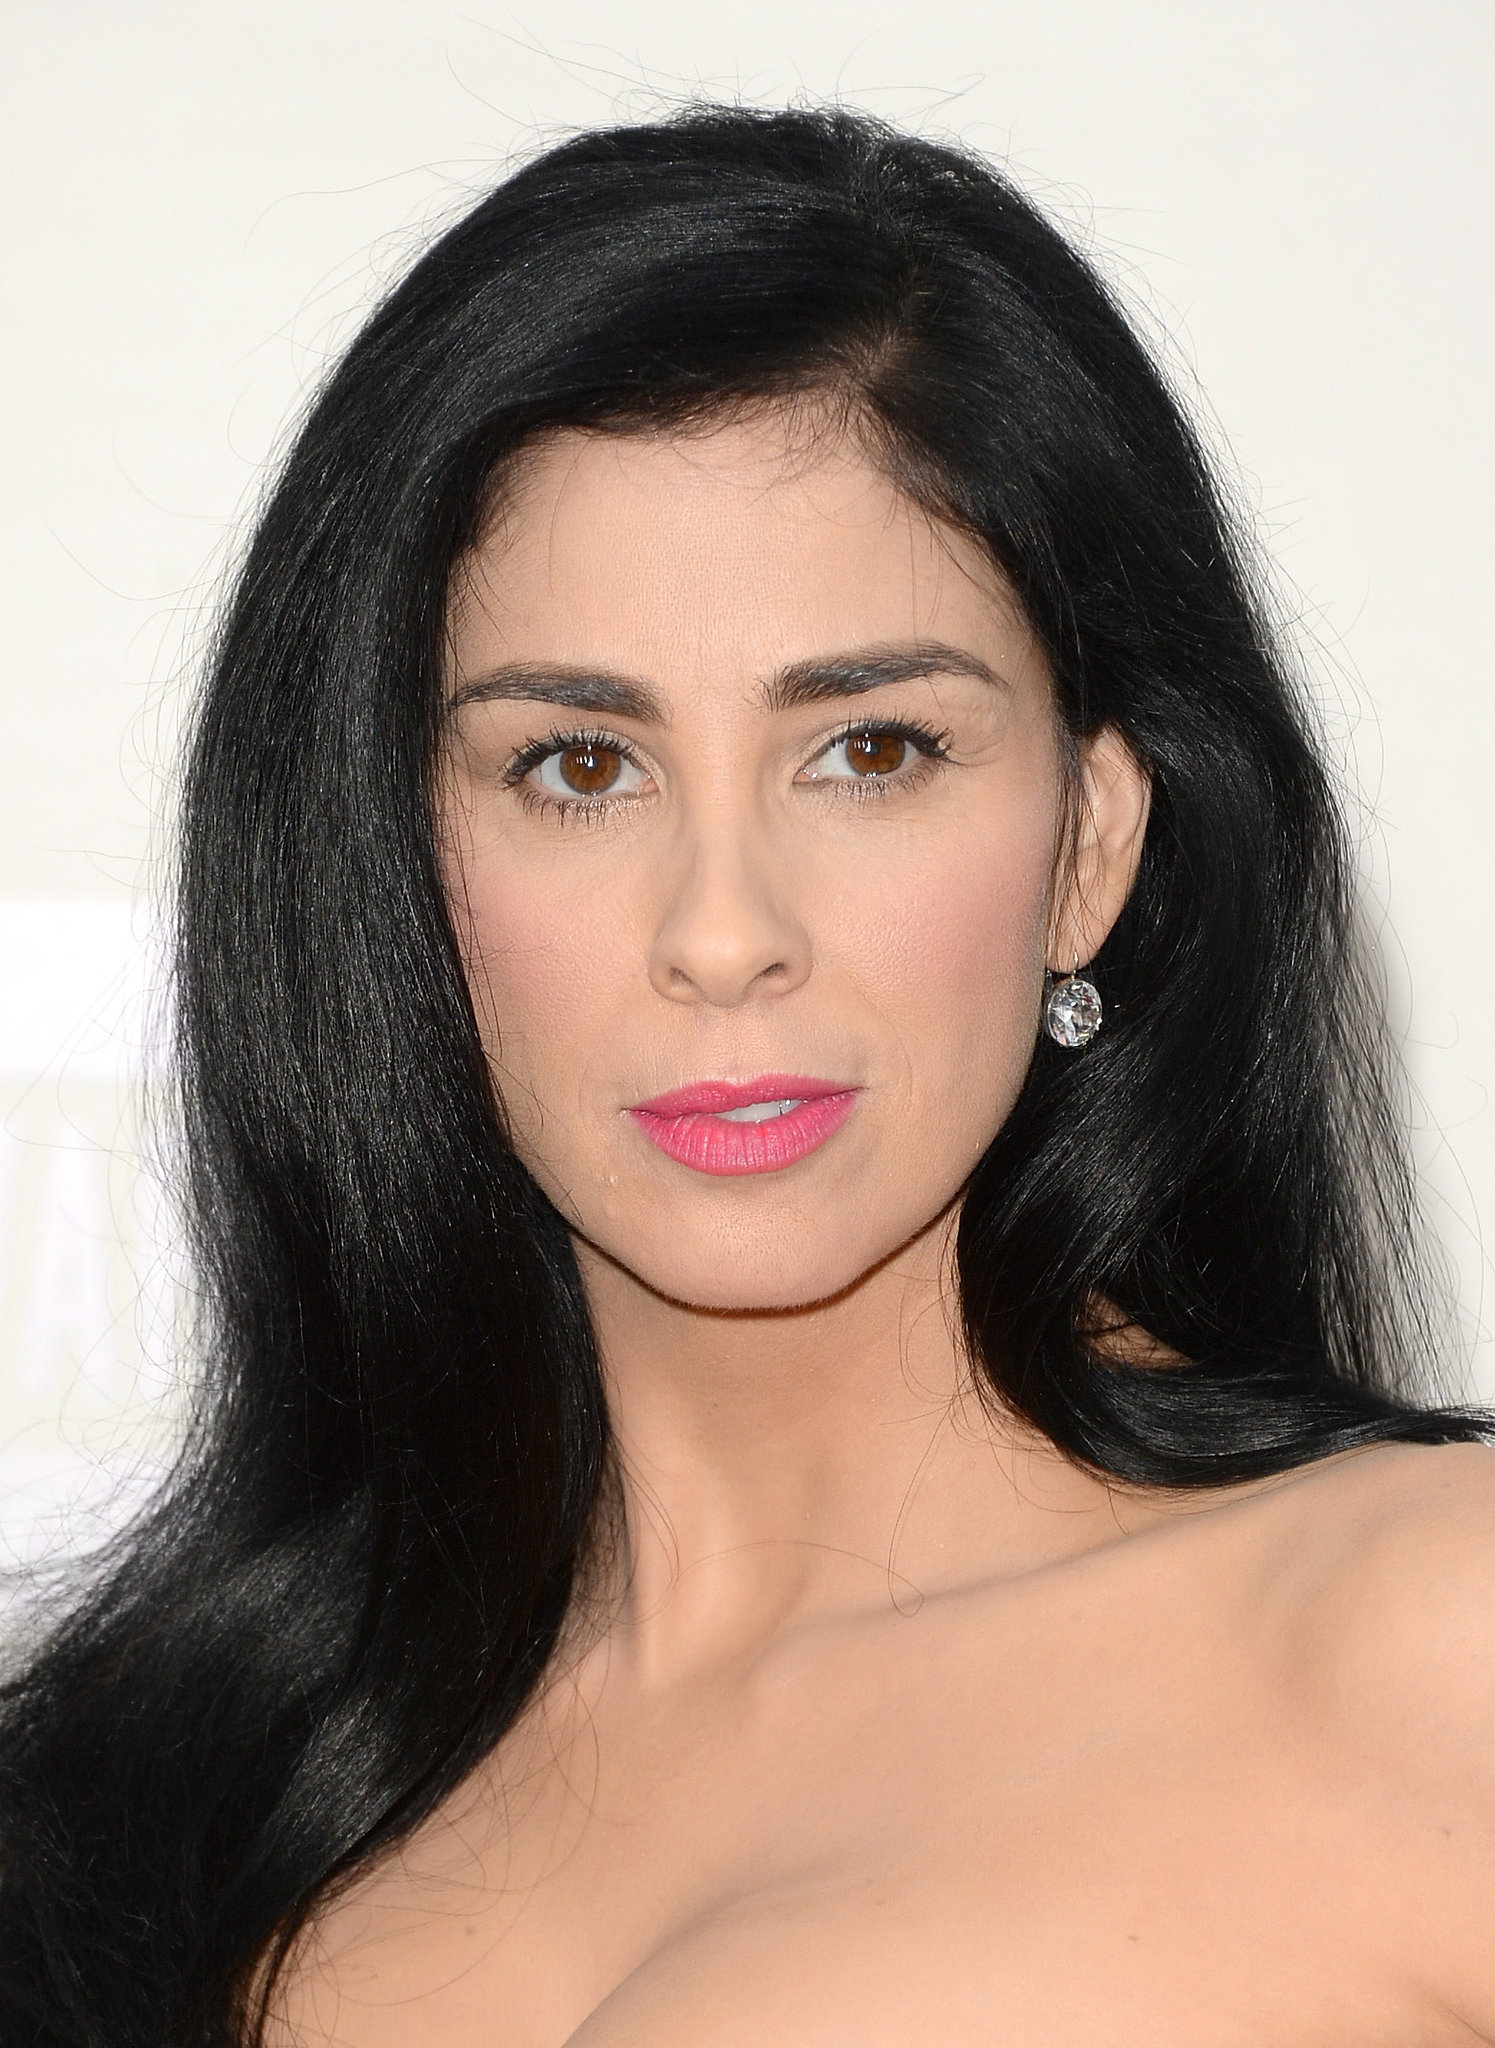 Sarah Silverman The Comedy The Comedy Celebrity Beautiful 